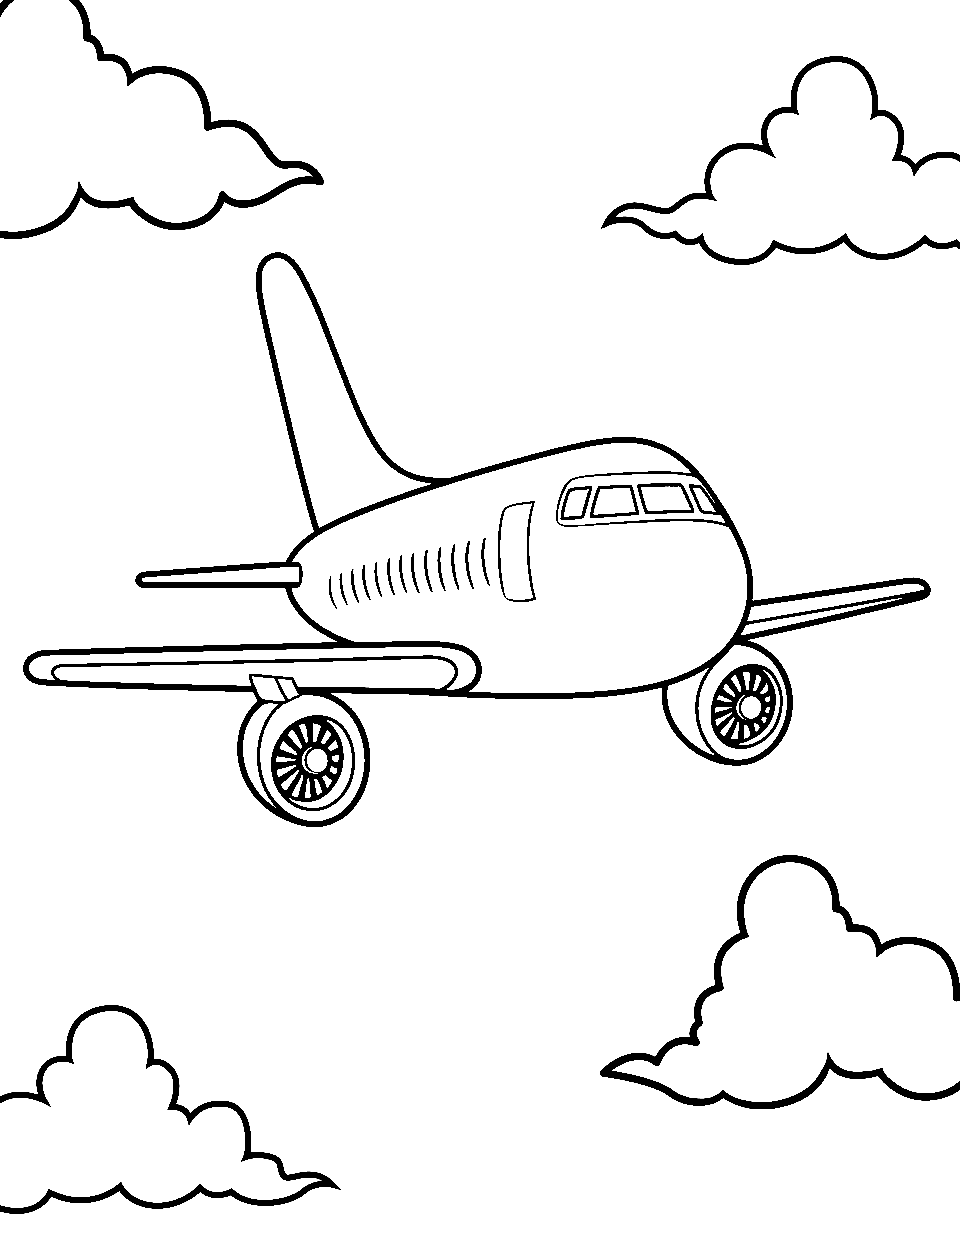 Cute Airbus Scene Airplane Coloring Page - A playful, cartoon-style Airbus flying with a backdrop of soft clouds.